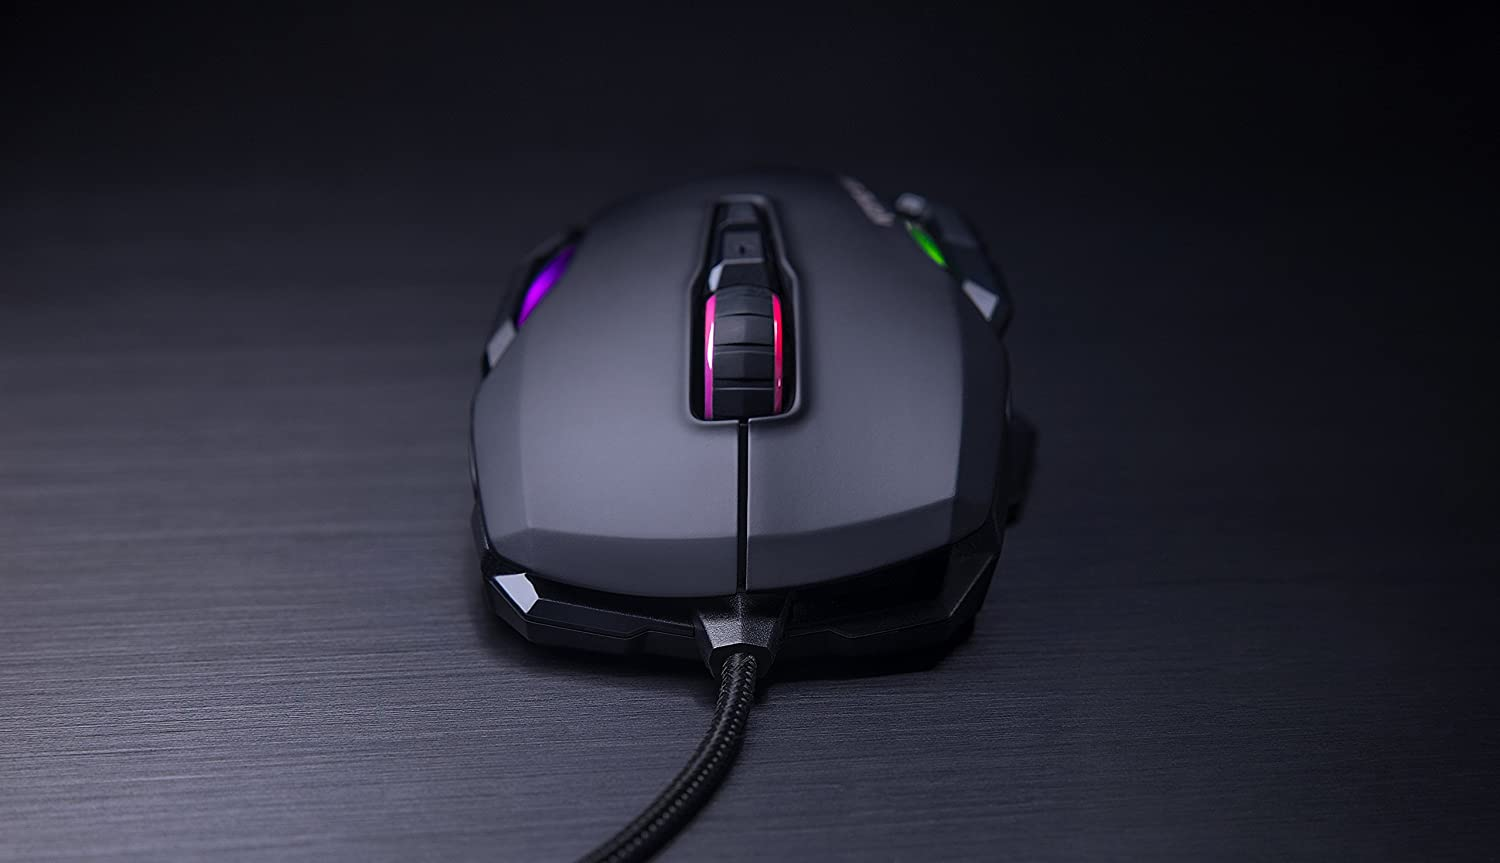 Roccat Https://Youtu.be/Mfk3Bmiiu8C Roccat® Swarm Powered – Comprehensive Driver Suite With A Striking Design And A Stunning Feature Set, The Kone Aimo Channels The Legacy Of Its Predecessor. It Boasts Refined Ergonomics With Enhanced Button Distinction, But What Truly Sets It Apart Is Its Rgba Double Lightguides Powered By The State-Of-The-Art Aimo Intelligent Lighting System. Aimo Is The Vivid Illumination Eco-System From Roccat®. Its Functionality Grows Exponentially Based On The Number Of Aimo-Enabled Devices Connected. It Also Reacts Intuitively And Organically To Your Computing Behavior. Eliminating The Need For Configuration, It Presents A State-Of-The-Art Lighting Scenario Right Out Of The Box, For A Completely Fluid, Next-Gen Experience. The Kone Aimo Features A Tri-Button Thumb Zone For A New And Even Greater Level Of Control. It Includes Two Wide Buttons Suitable For All Hand Sizes, Plus An Ergonomic Lower Button Set To Easy-Shift[+]™ By Default. Easy-Shift[+]™ Is The World-Famous Button Duplicator Technology That Lets You Assign A Secondary Function To The Mouse'S Buttons. It'S Easy To Program And Has Options For Simple Commands And Complex Macros. Gaming Mouse Roccat - Kone Aimo Rgba Smart Customization Gaming Mouse (Black) 23 Programmable Keys, Designed In Germany